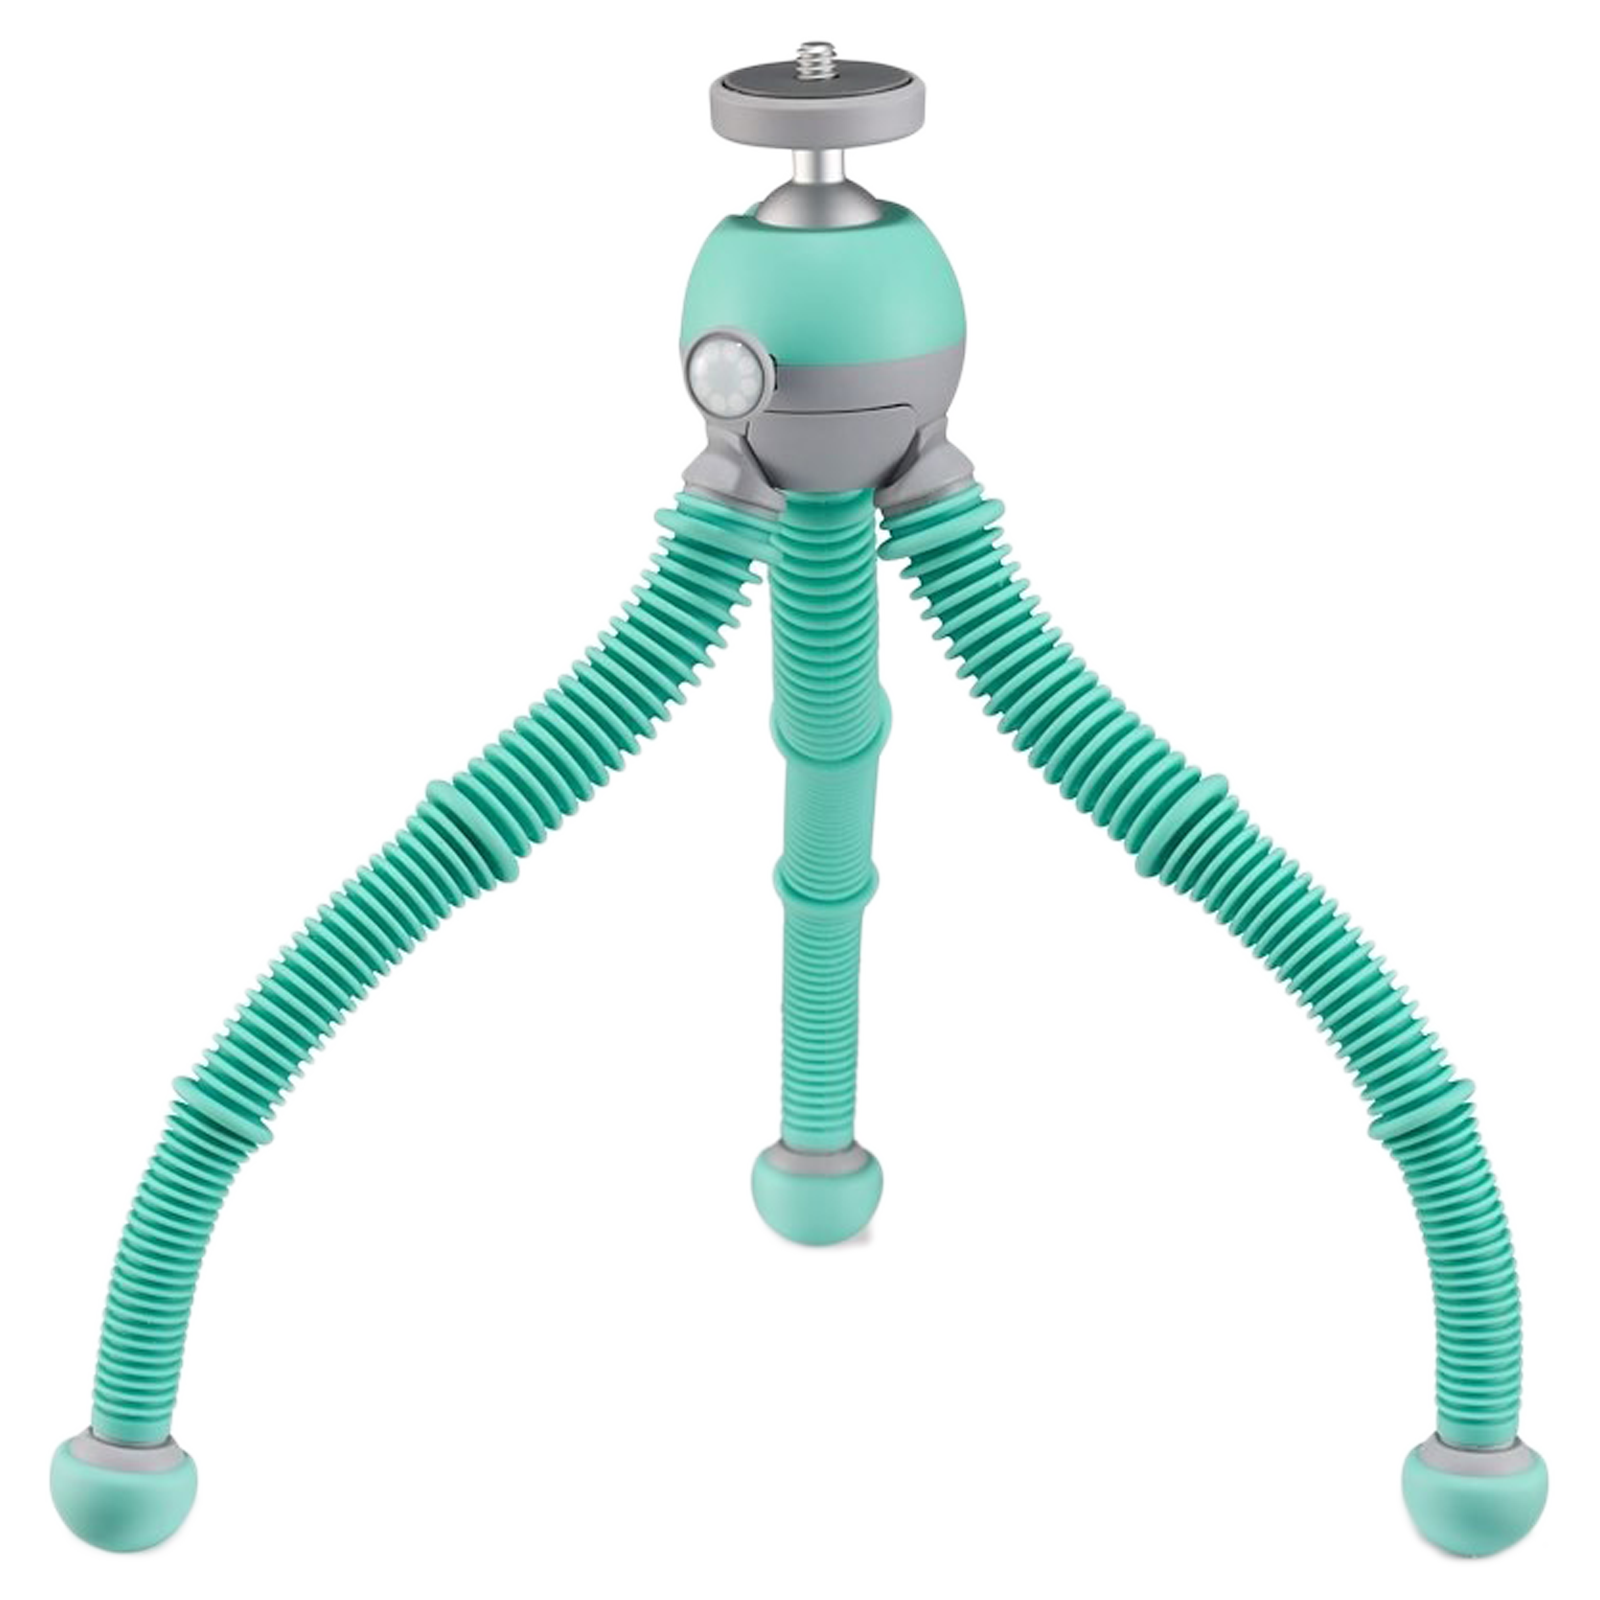 JOBY PodZilla 25cm Adjustable Tripod for Mobile and Camera (360 Degree GripTight, Teal)